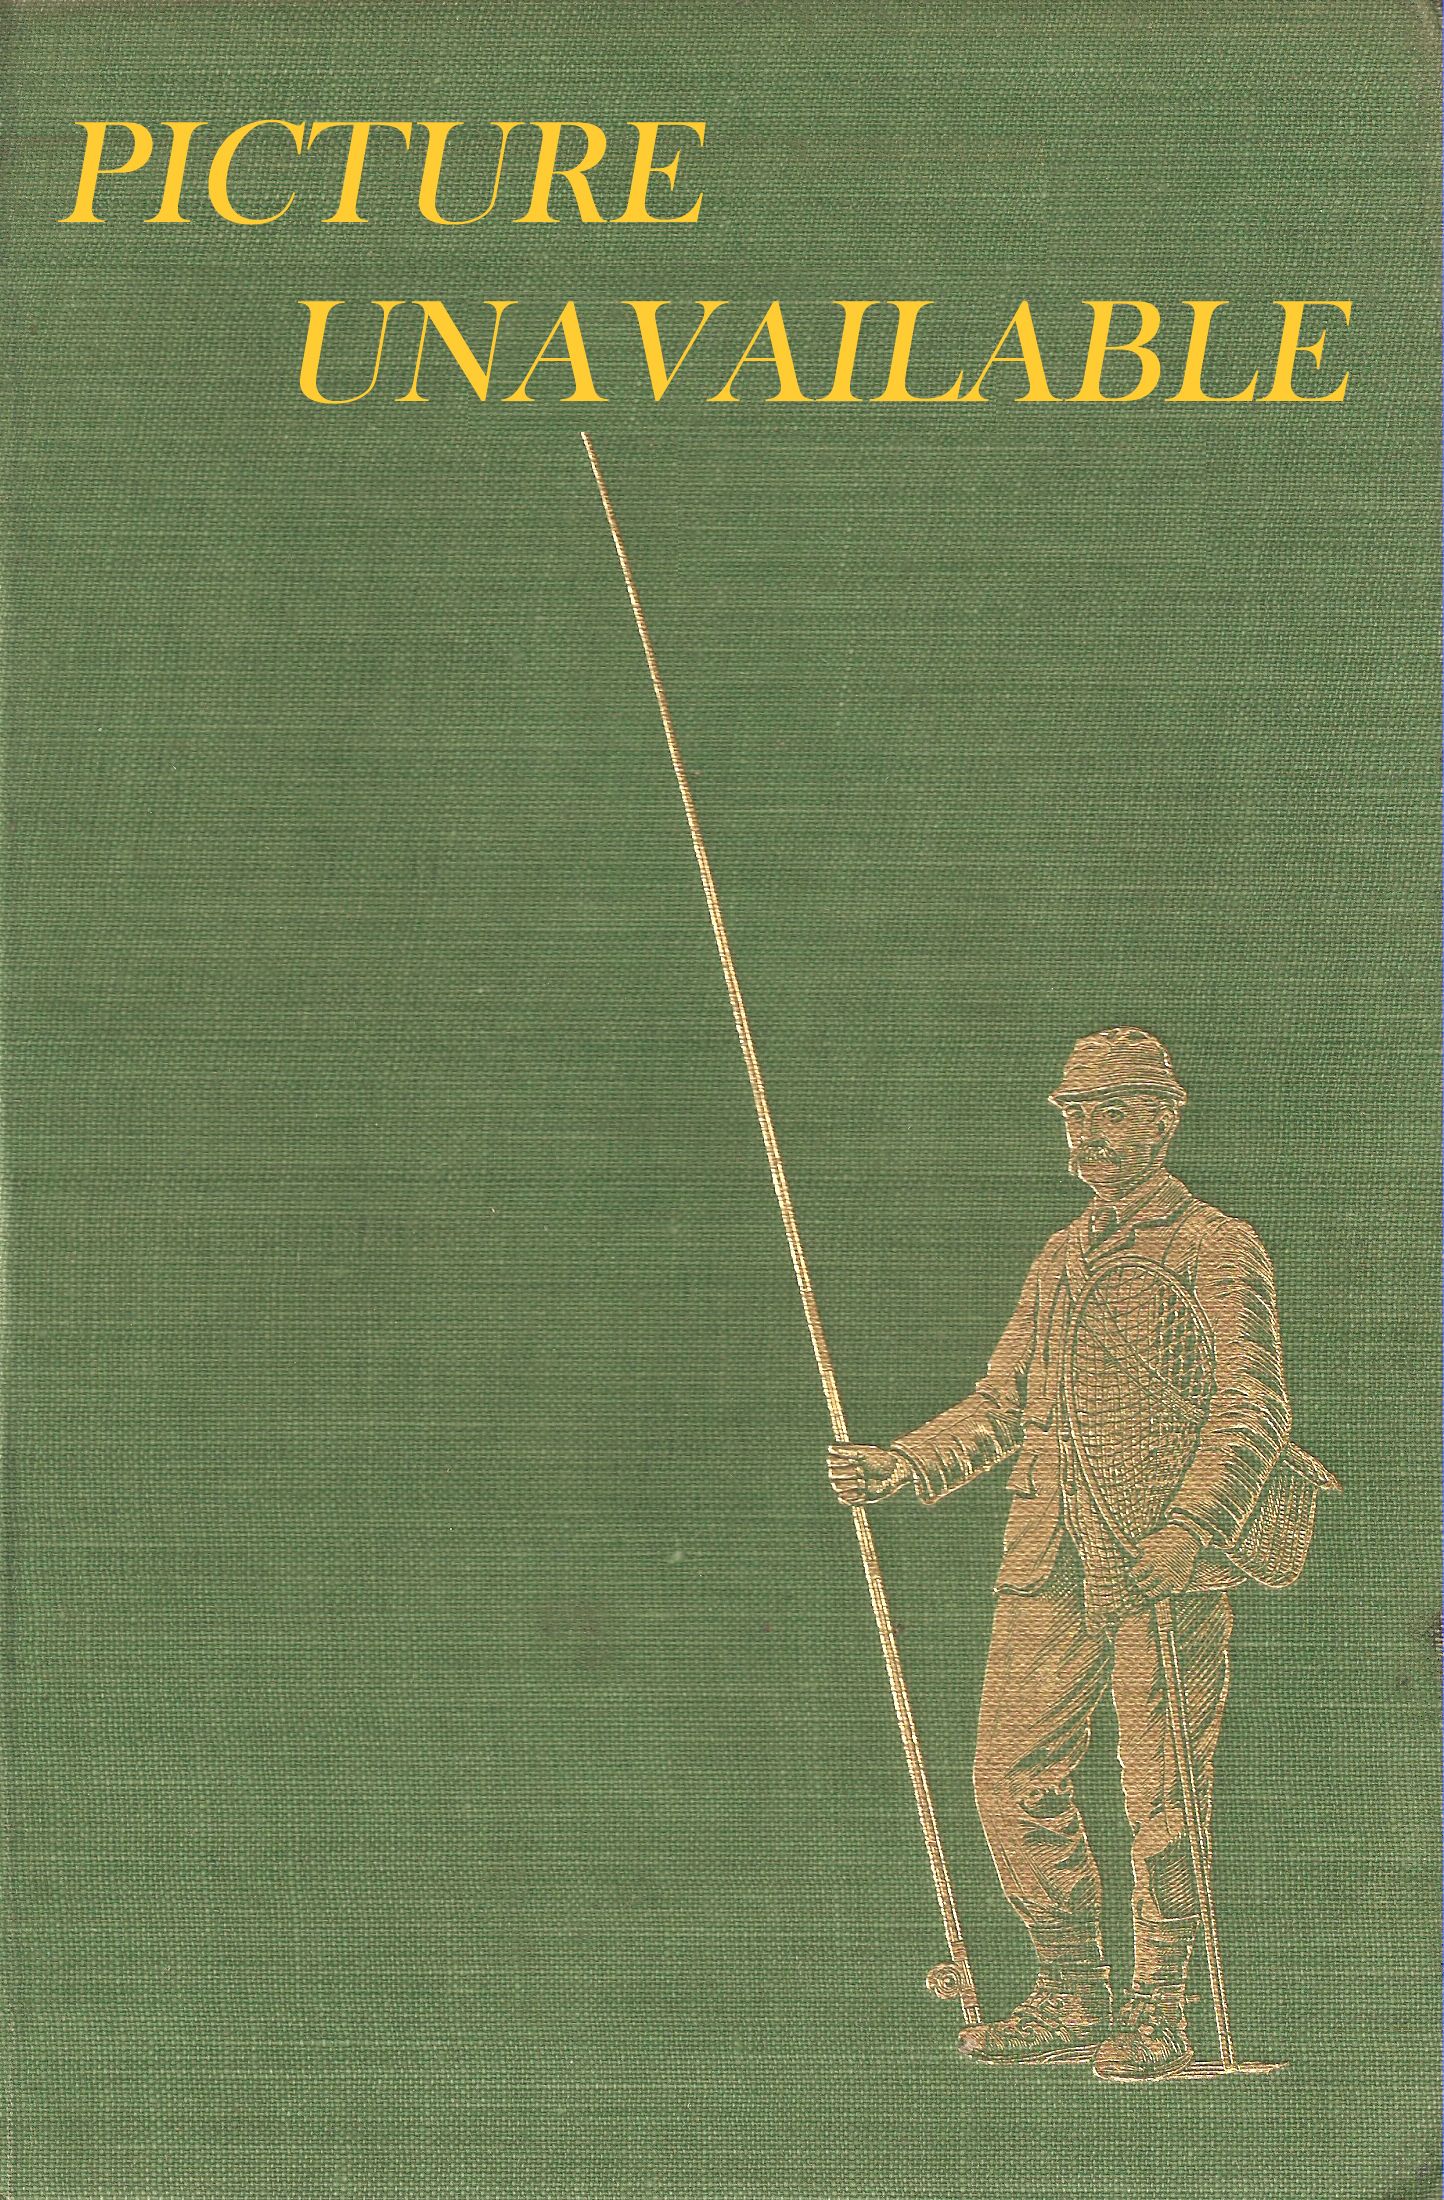 THE CADDISFLY HANDBOOK: AN ORVIS GUIDE. By Dick Pobst and Carl Richards.